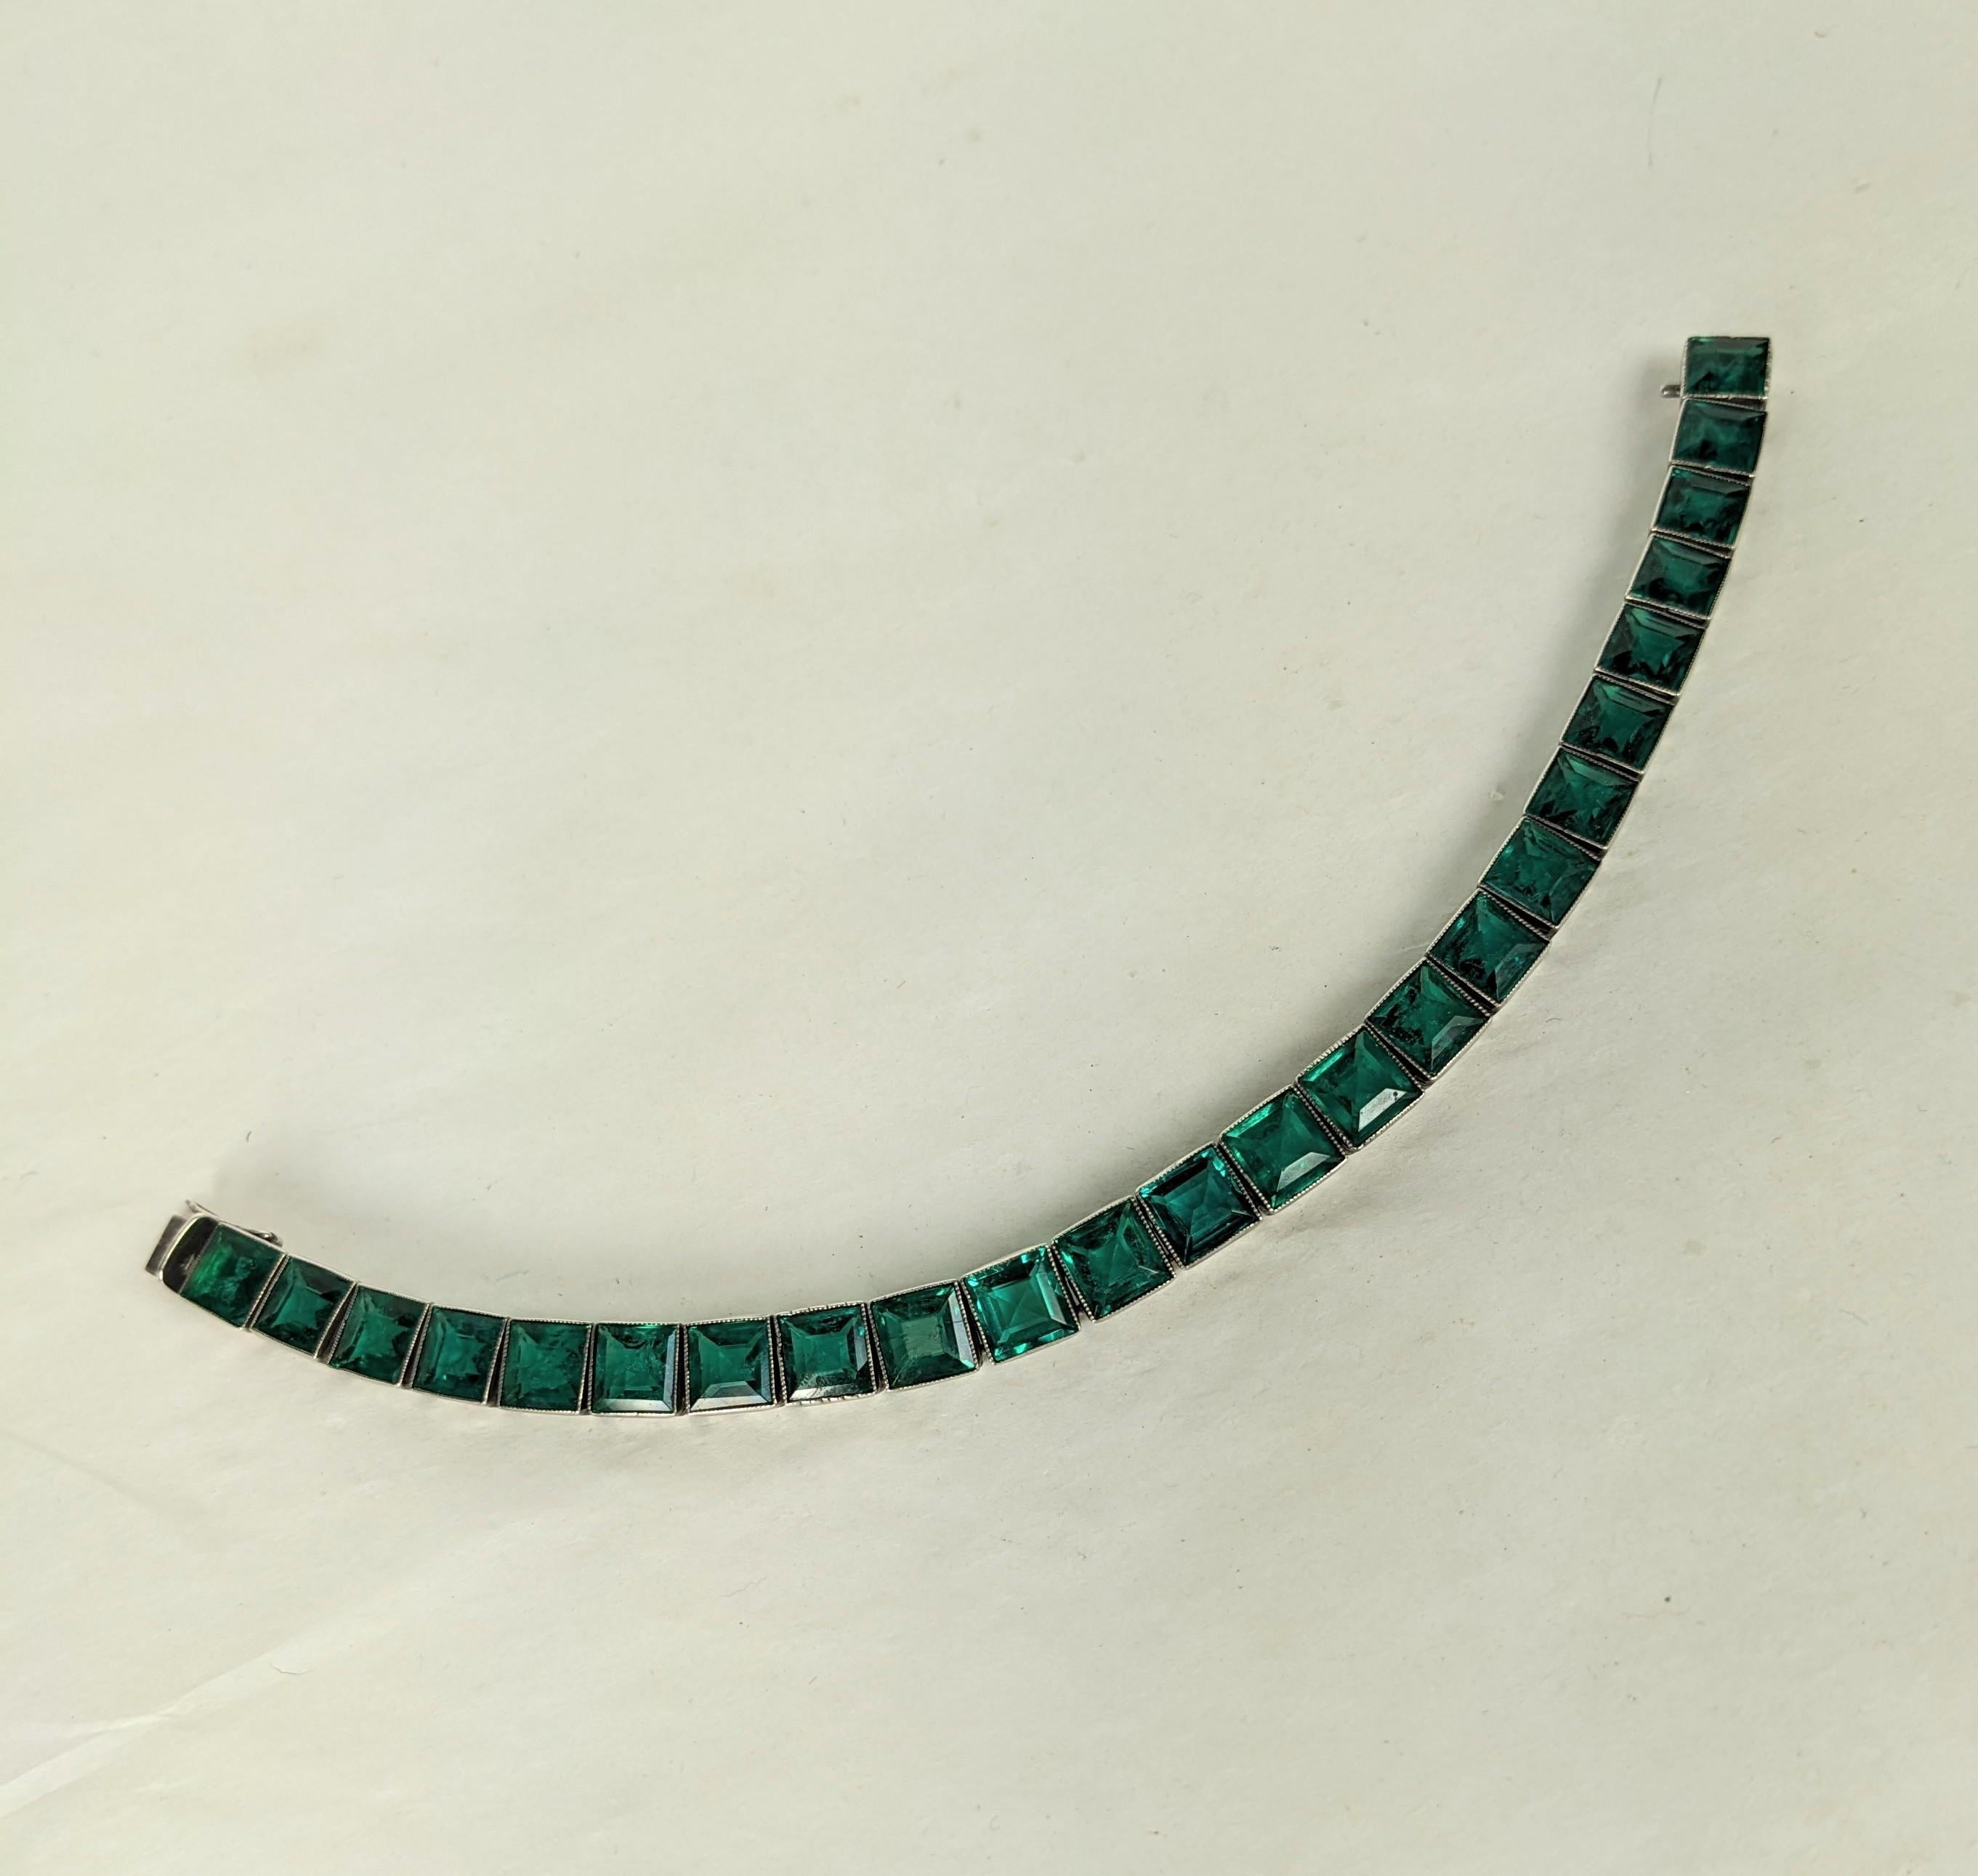 Attractive Art Deco Straight Line Emerald Bracelet set in sterling from the 1930's. High quality manufactured Deco bracelet with etched shoulders and emerald pastes in serrated settings with molded inclusions to replicate real stones. Lesser quality